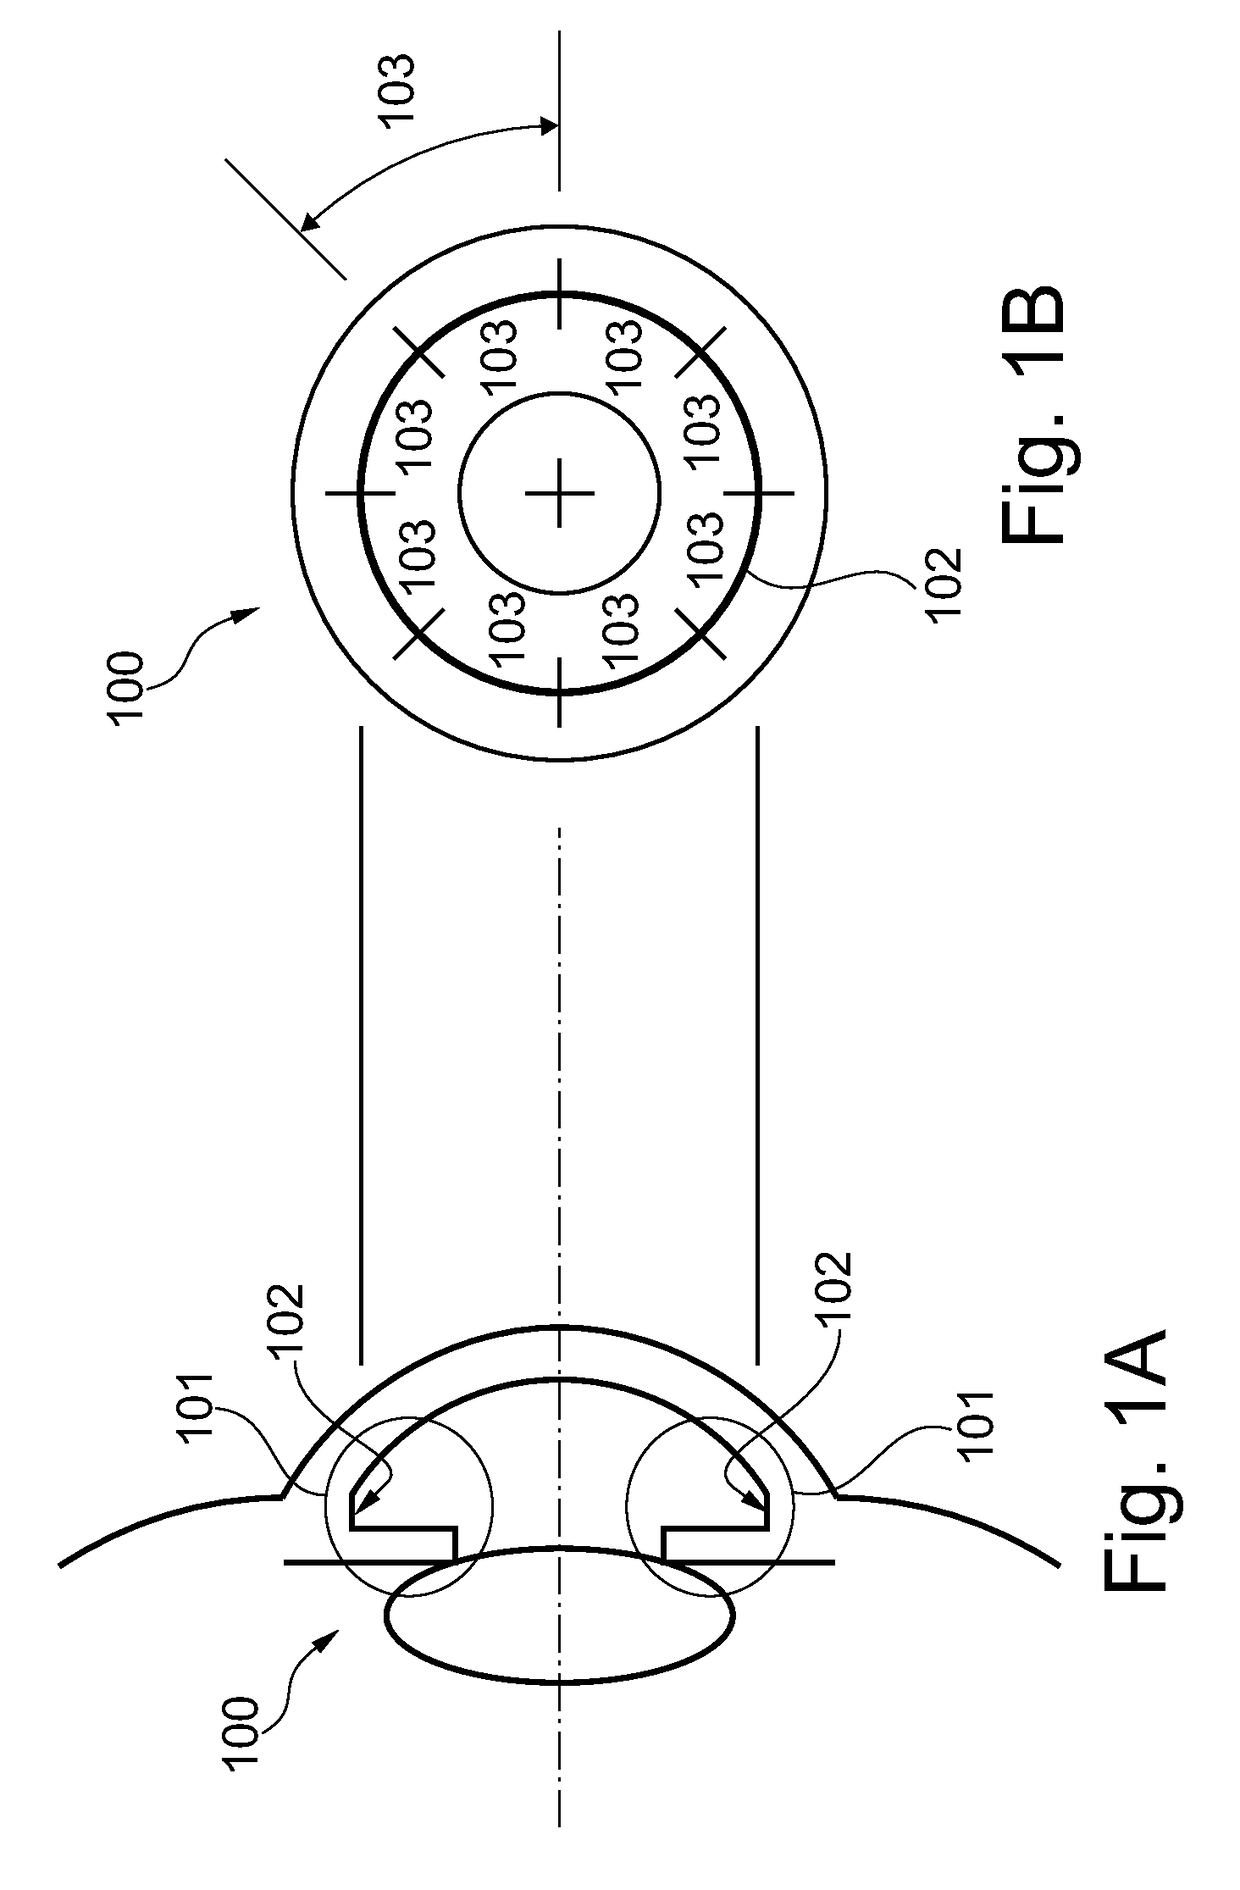 Optical equipment for observation of the iridocorneal zone, methods of measuring and/or evaluating the iridocorneal zone